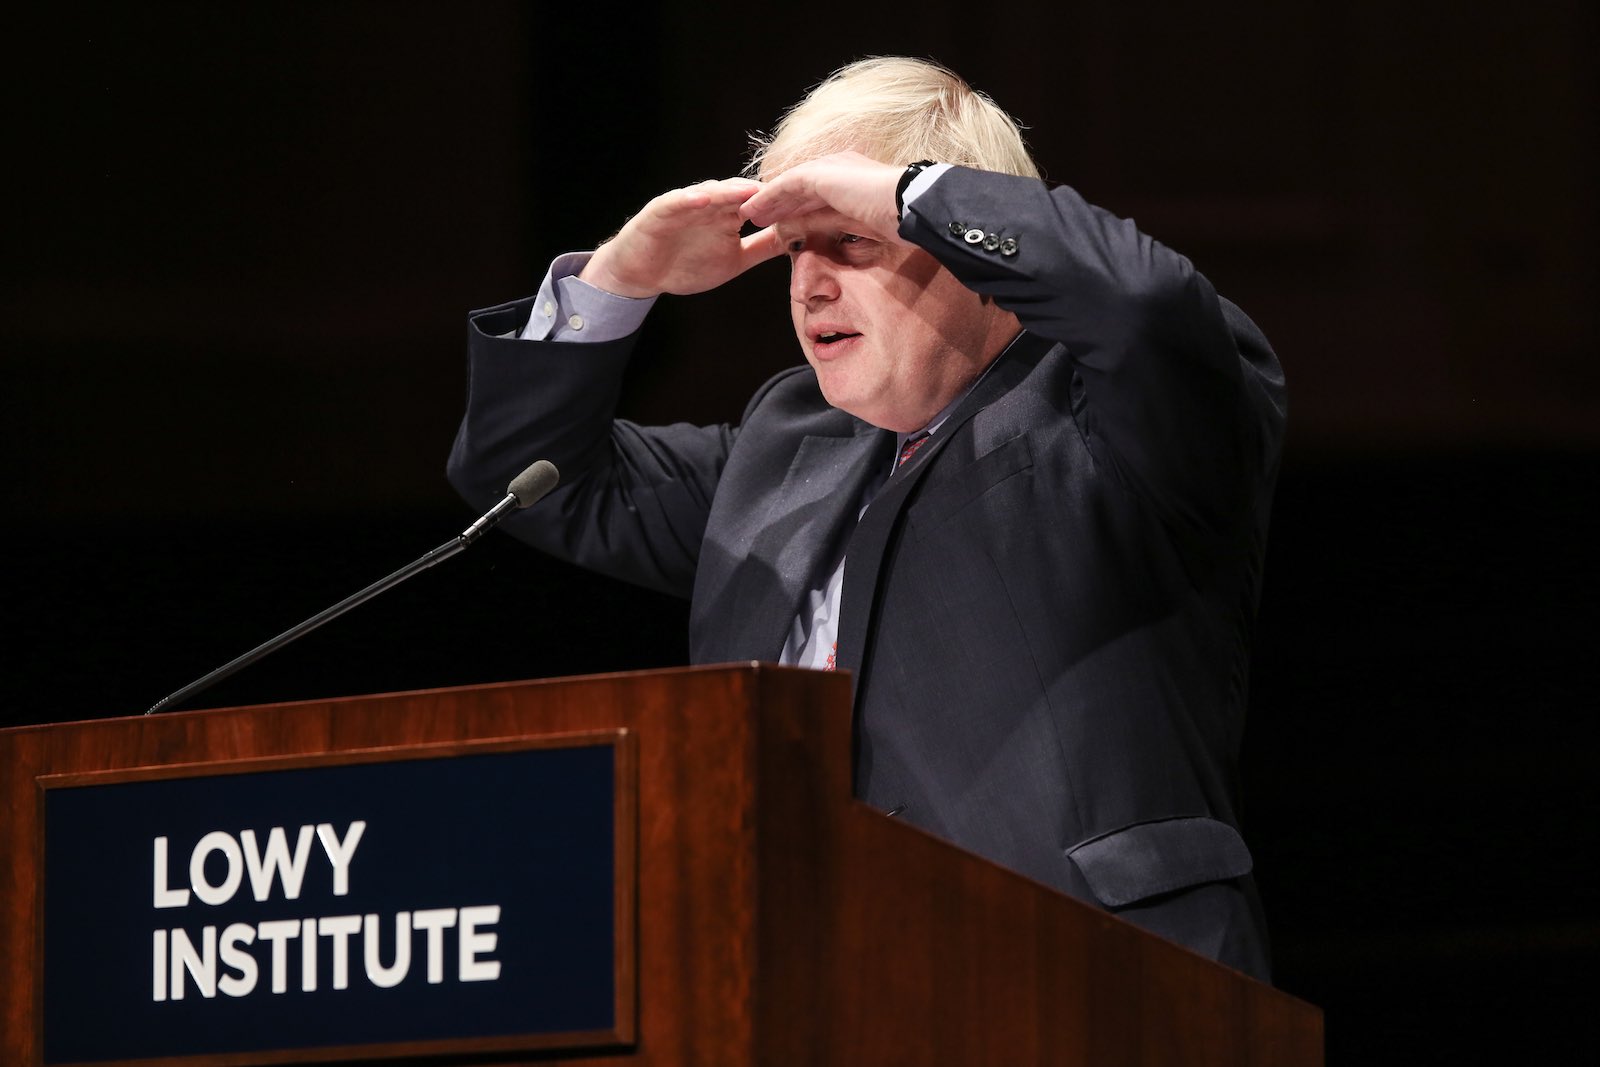 Boris Johnson, then UK Foreign Secretary, now Conservative Party leader and about to be Prime Minister, delivering the annual Lowy Lecture in Sydney on 27 July 2017